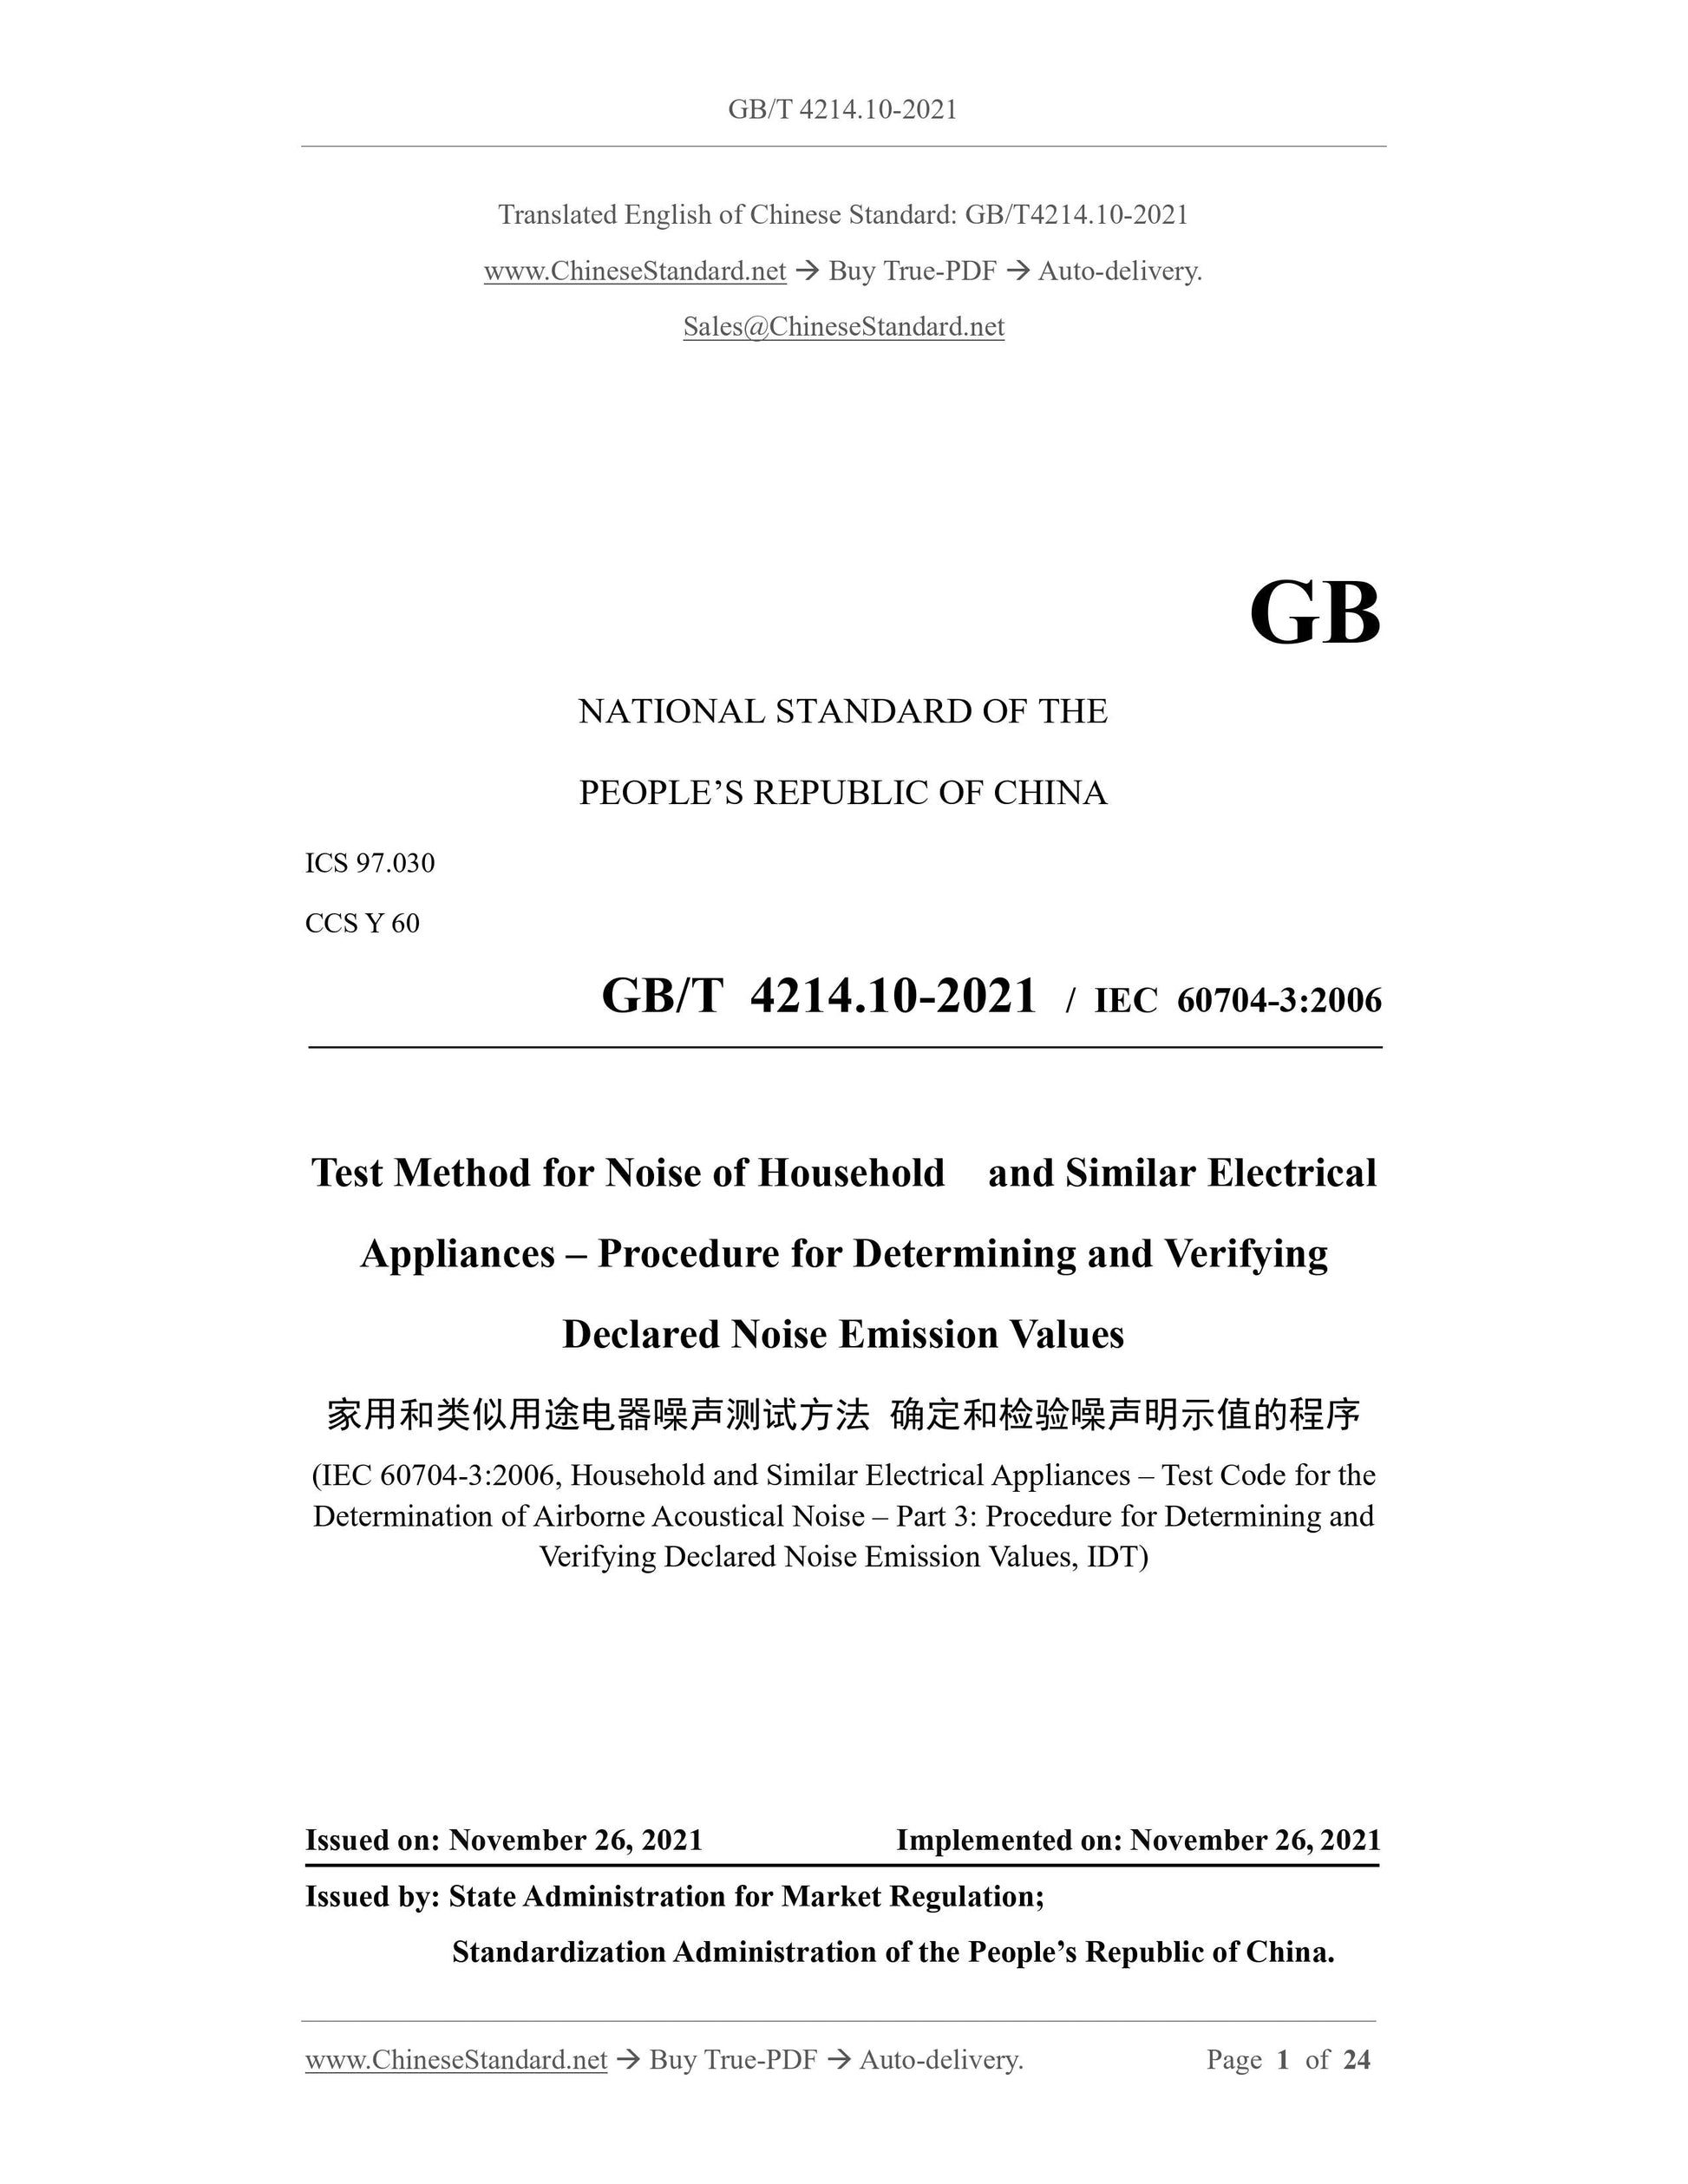 GB/T 4214.10-2021 Page 1